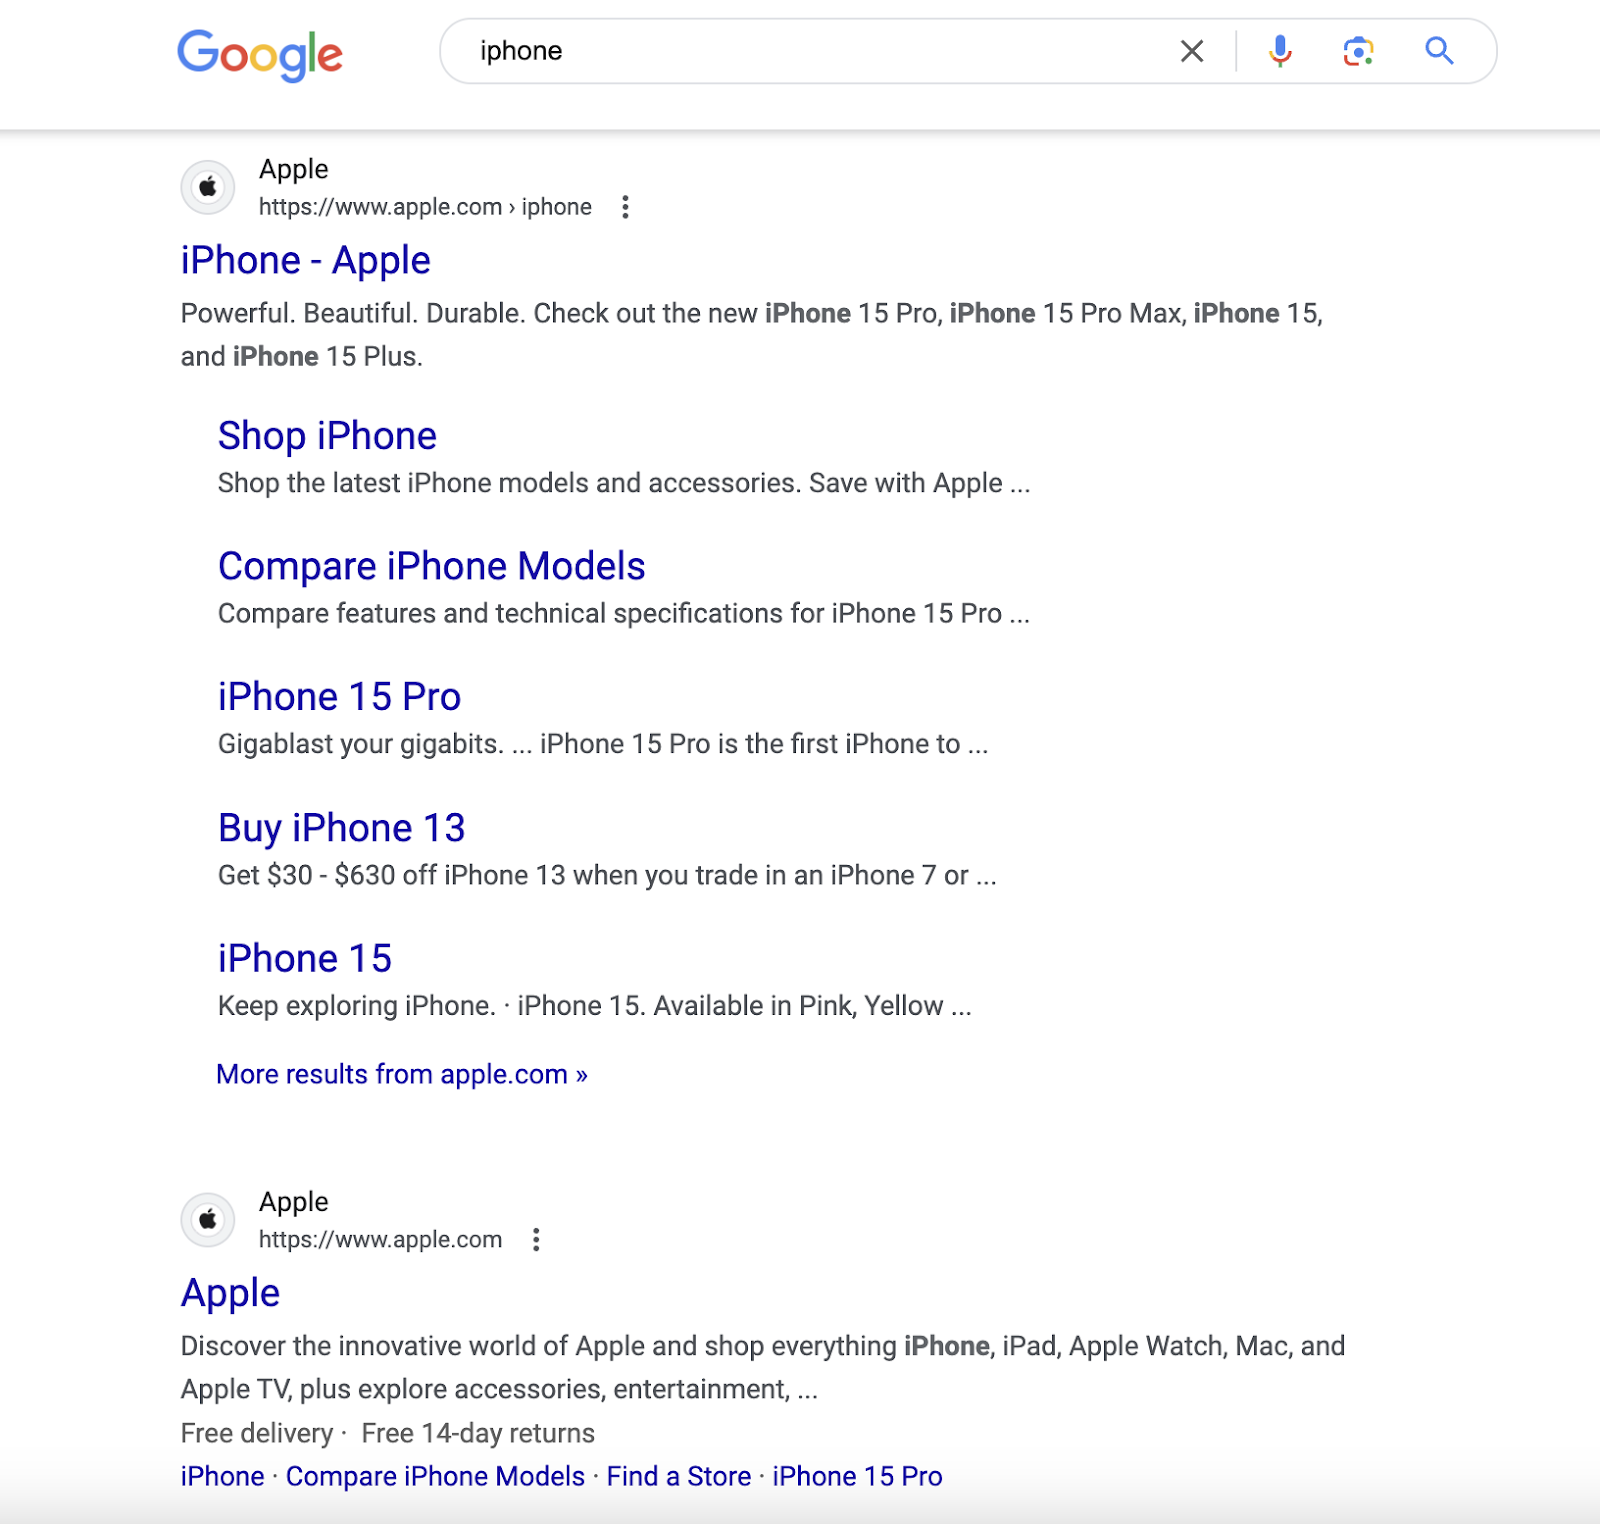 Only two Apple organic serp listings are above the fold.